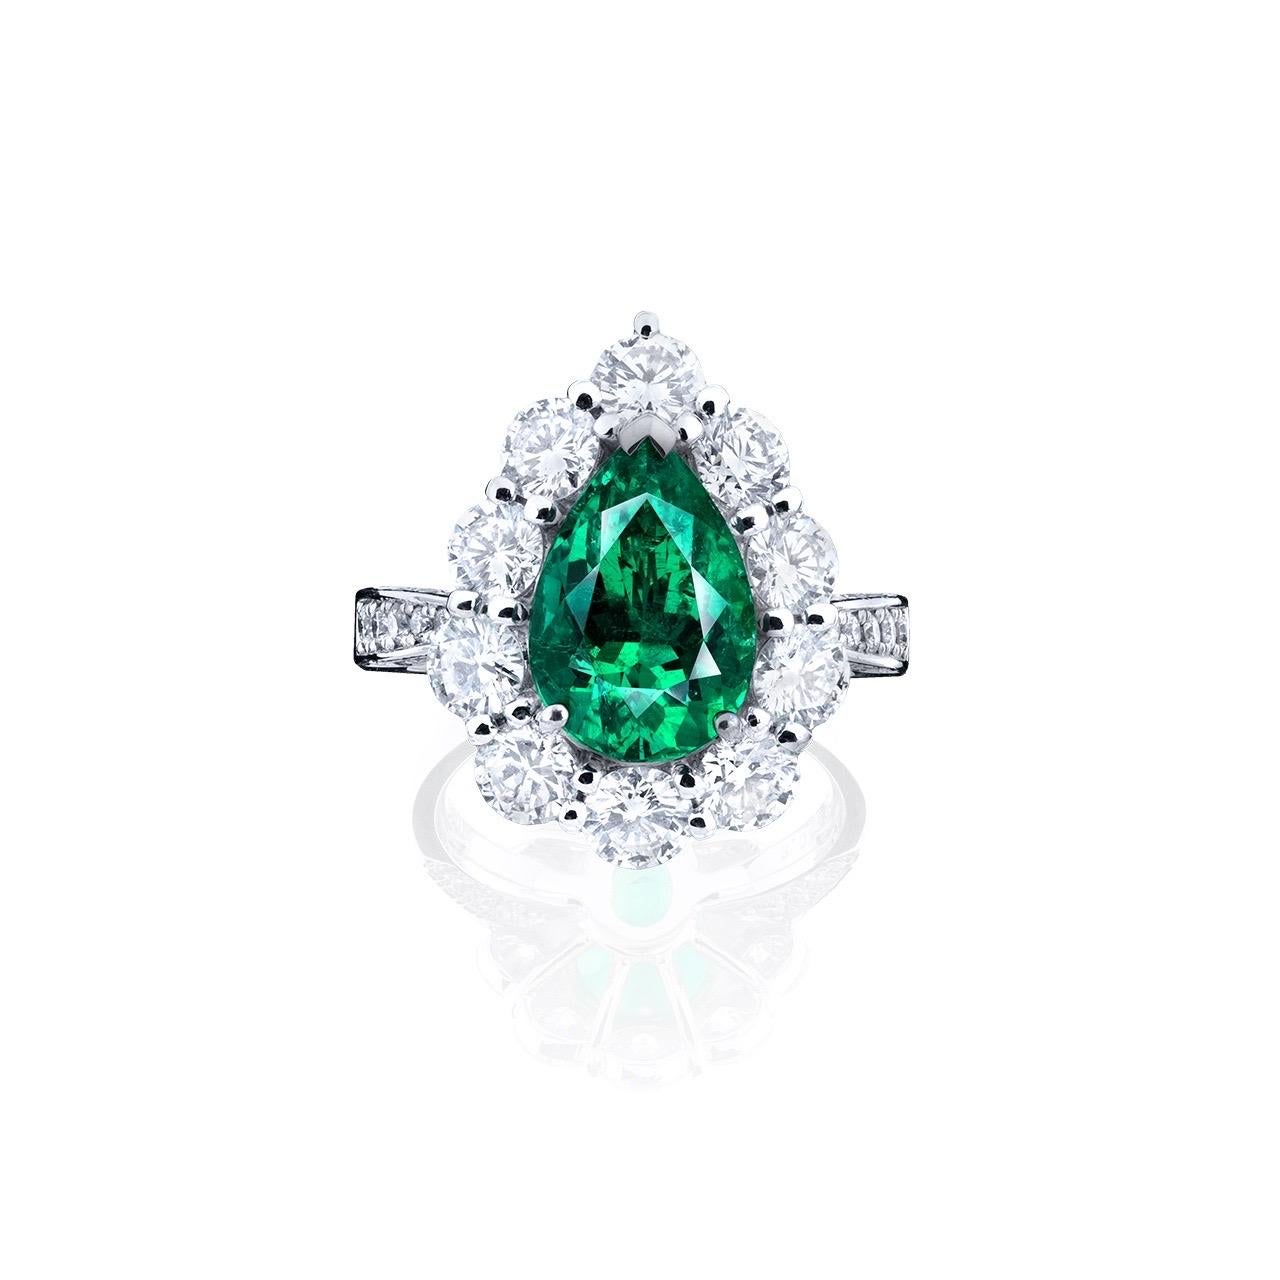 Colombian no oil Main stone: 3.05 carat Vivid Green, Pear teardrop Emerald Untreated. 
Setting: White diamonds totaling approximately 2.62 carats
From Emilio Jewelry, a well known and respected wholesaler/dealer located on New York’s iconic Fifth